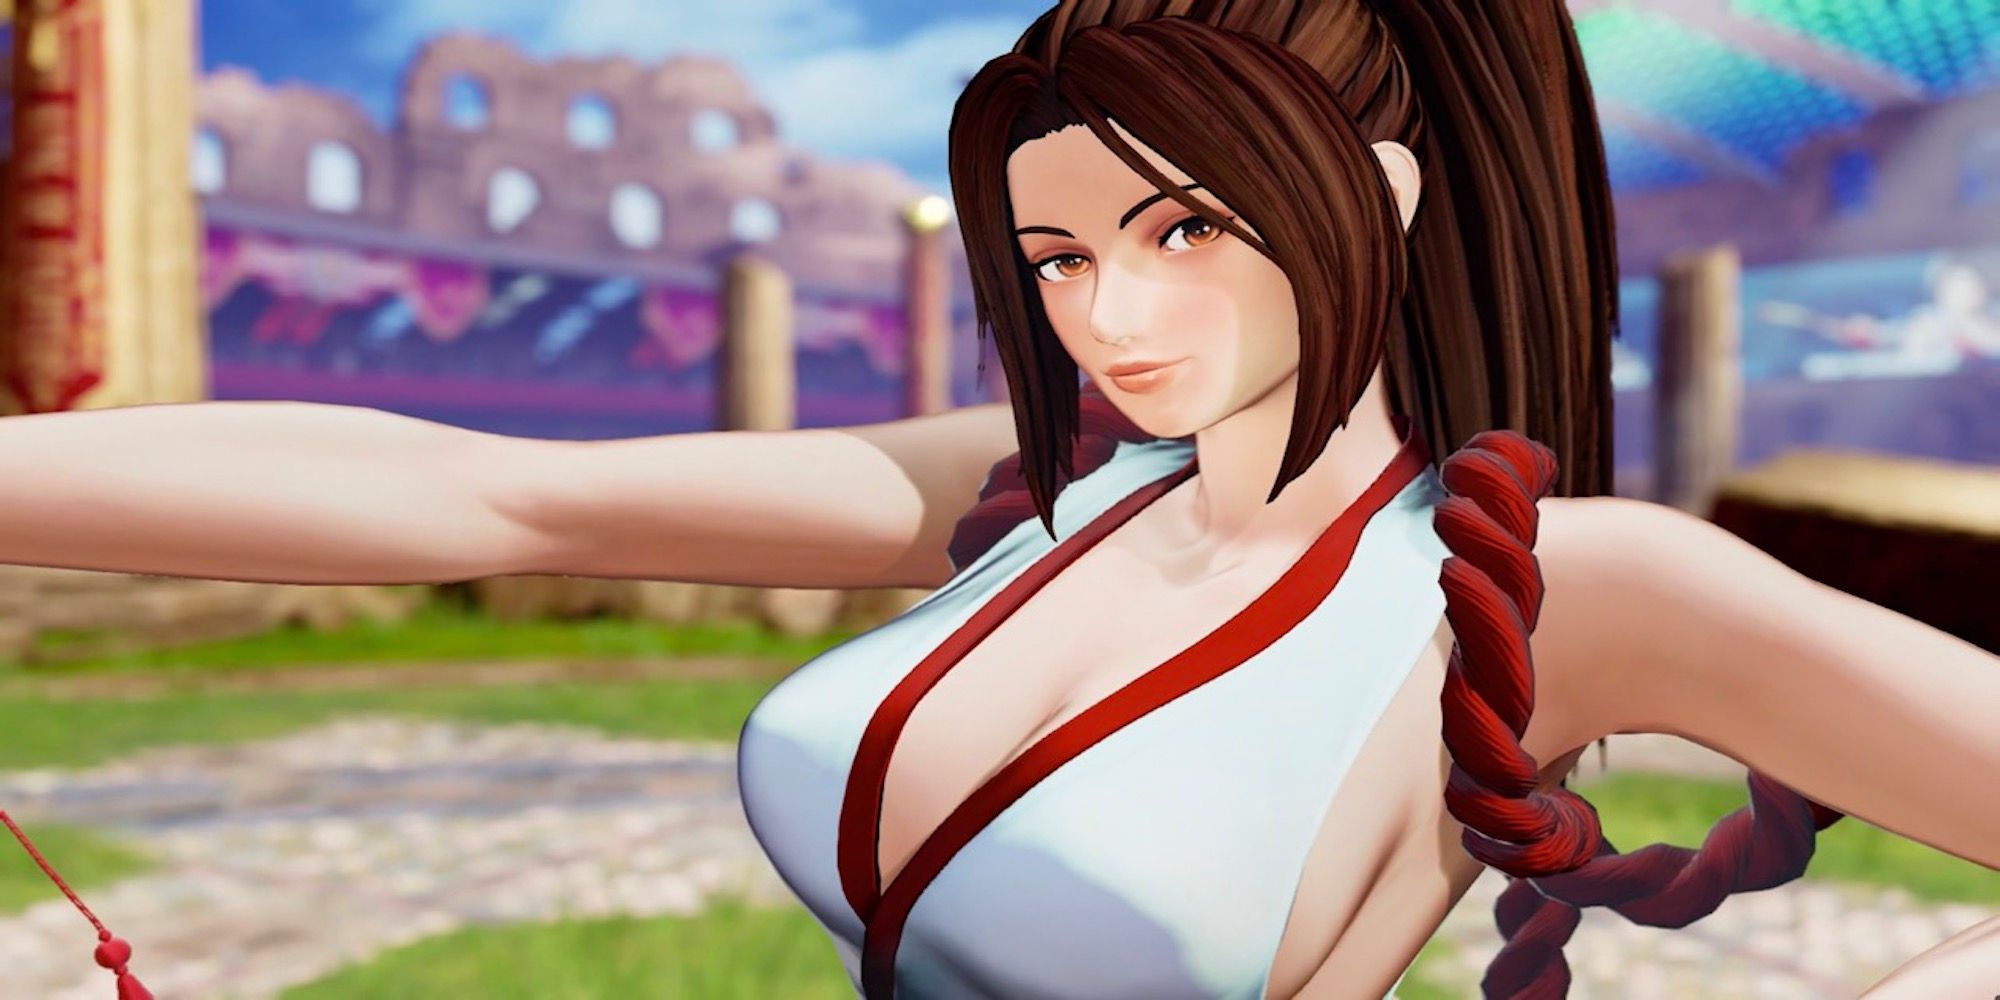 Mai from The King of Fighters 15